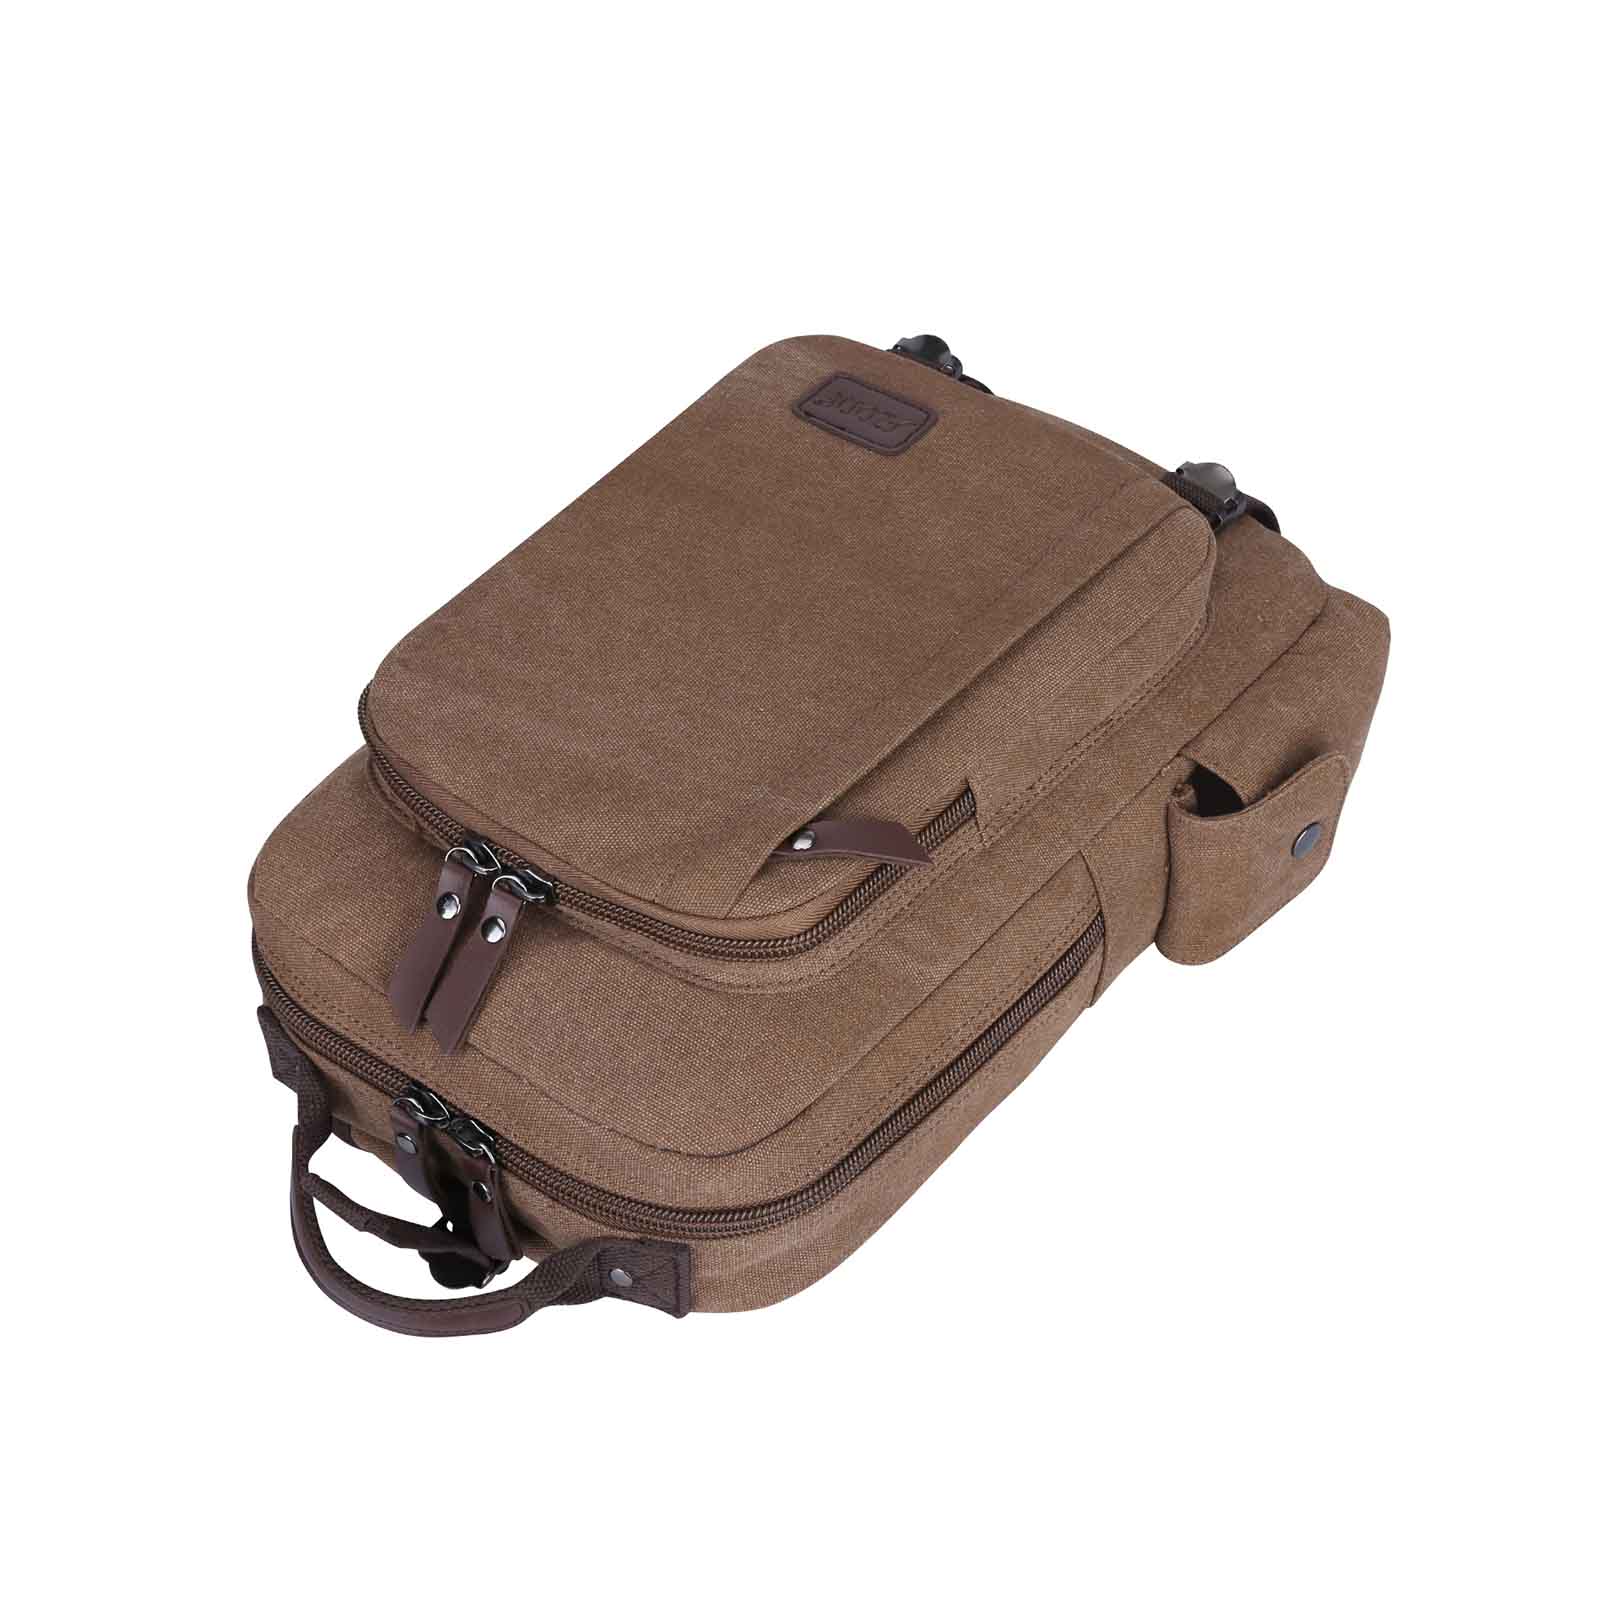 Laptop Bag By Franklin Covey Size: Large